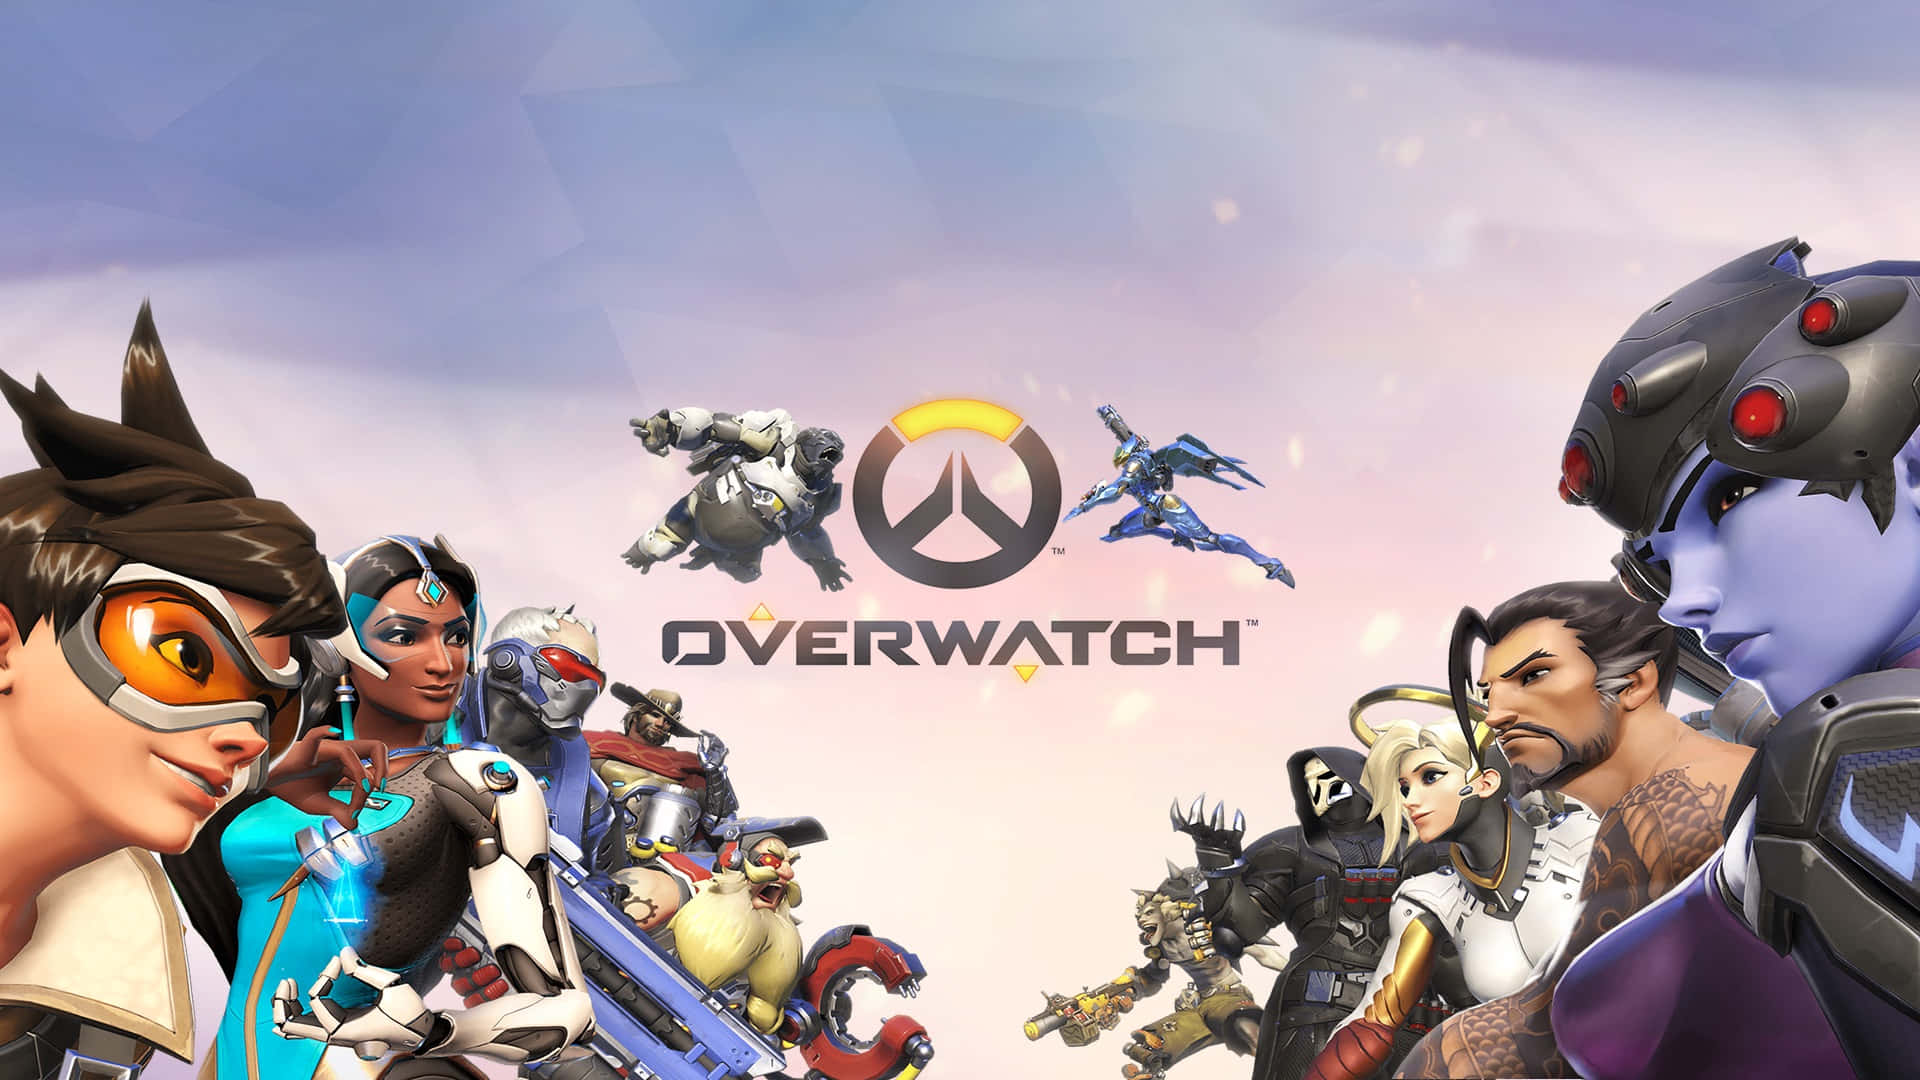 1920x1080 Overwatch Characters Poster Design Background